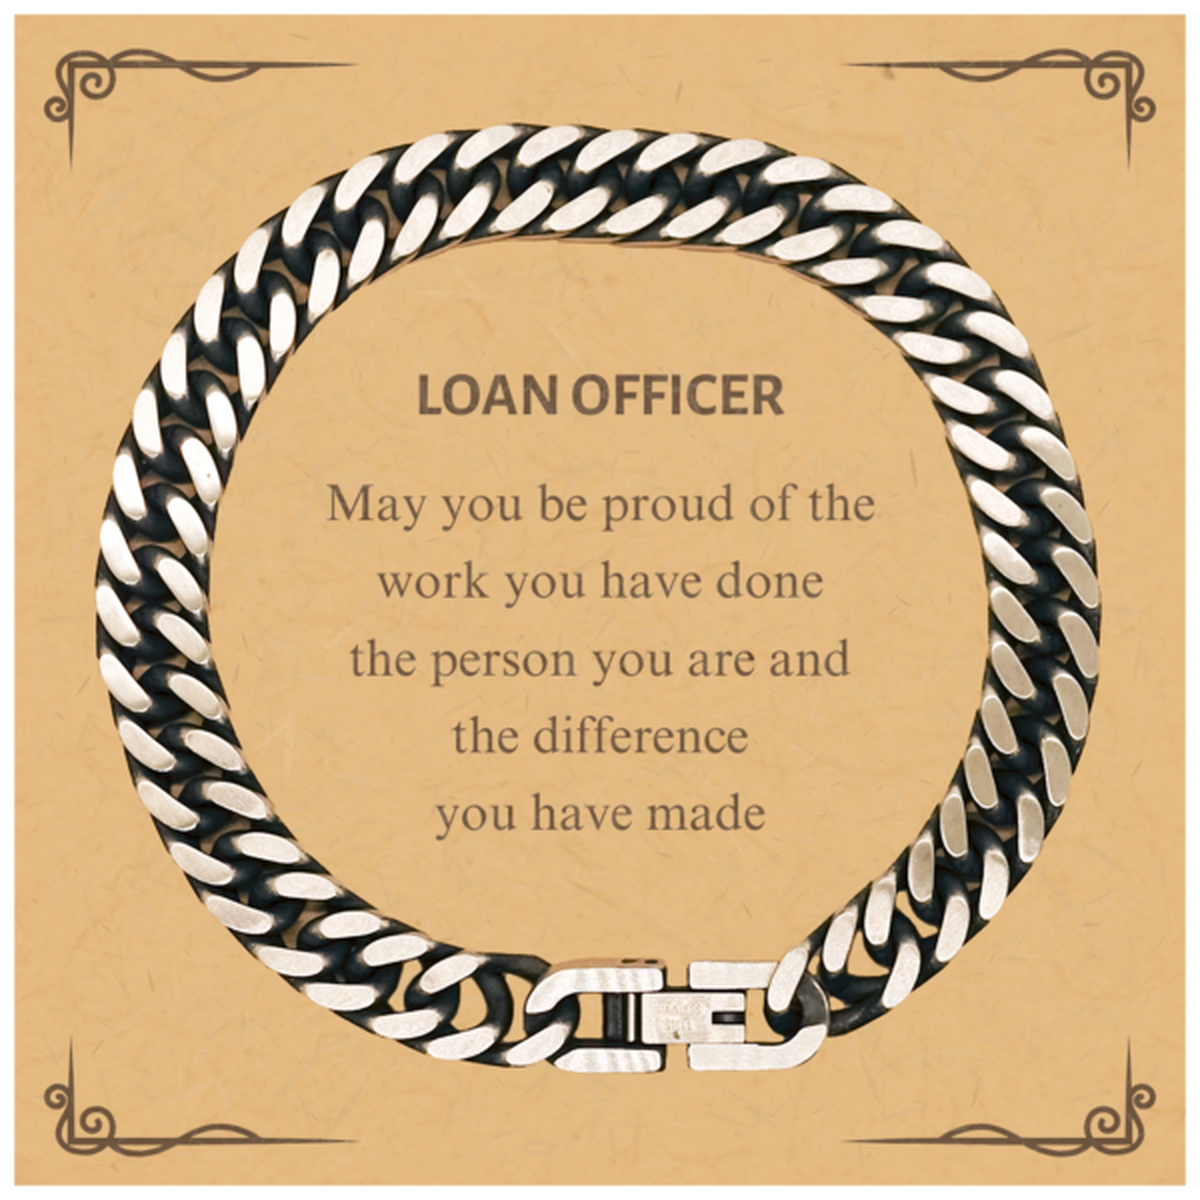 Loan Officer May you be proud of the work you have done, Retirement Loan Officer Cuban Link Chain Bracelet for Colleague Appreciation Gifts Amazing for Loan Officer